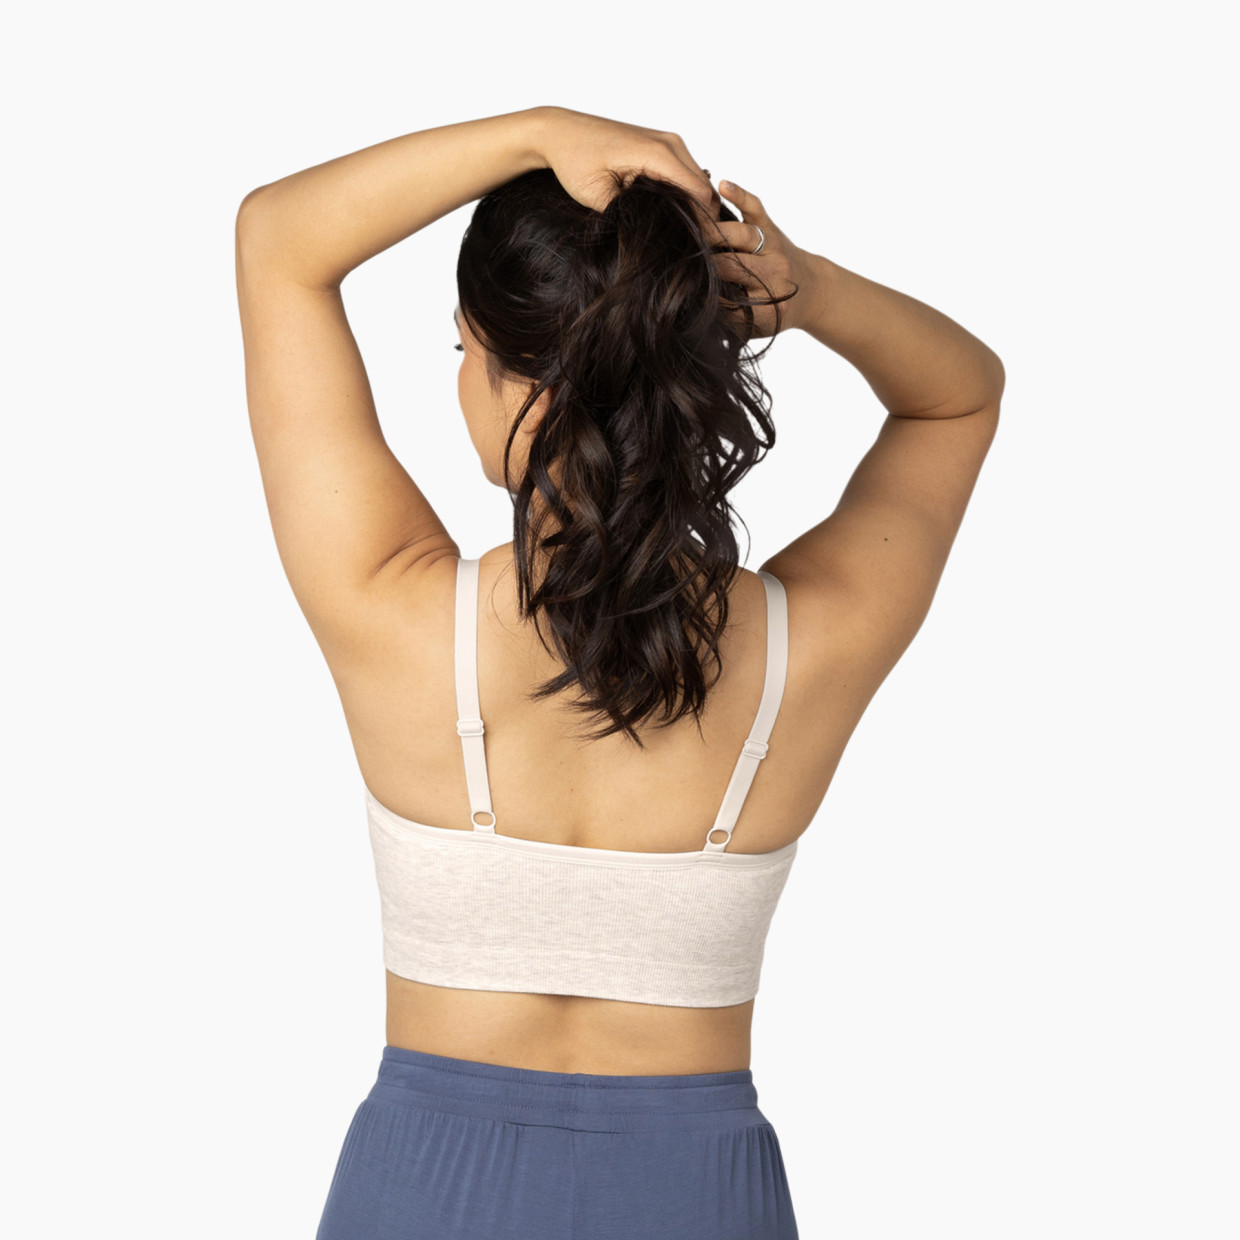 Kindred Bravely Sublime Bamboo Hands-Free Pumping Lounge & Sleep Bra - Oatmeal Heather, Small.